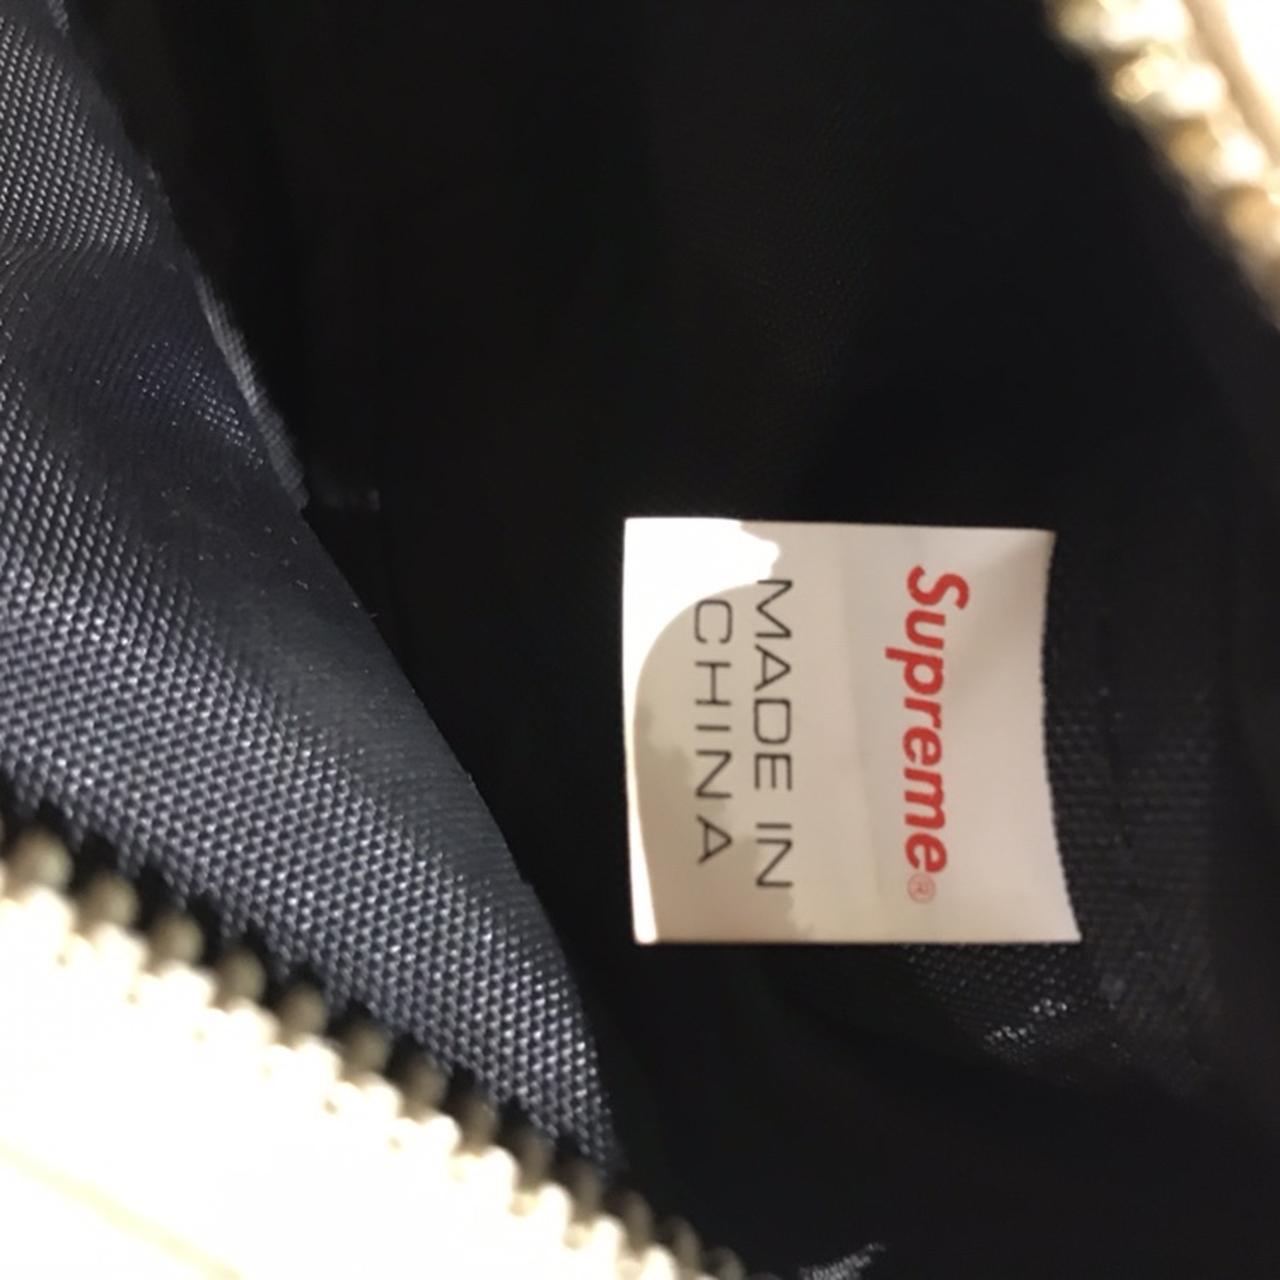 Supreme ss18 Fanny pack light use Dm for any extra - Depop